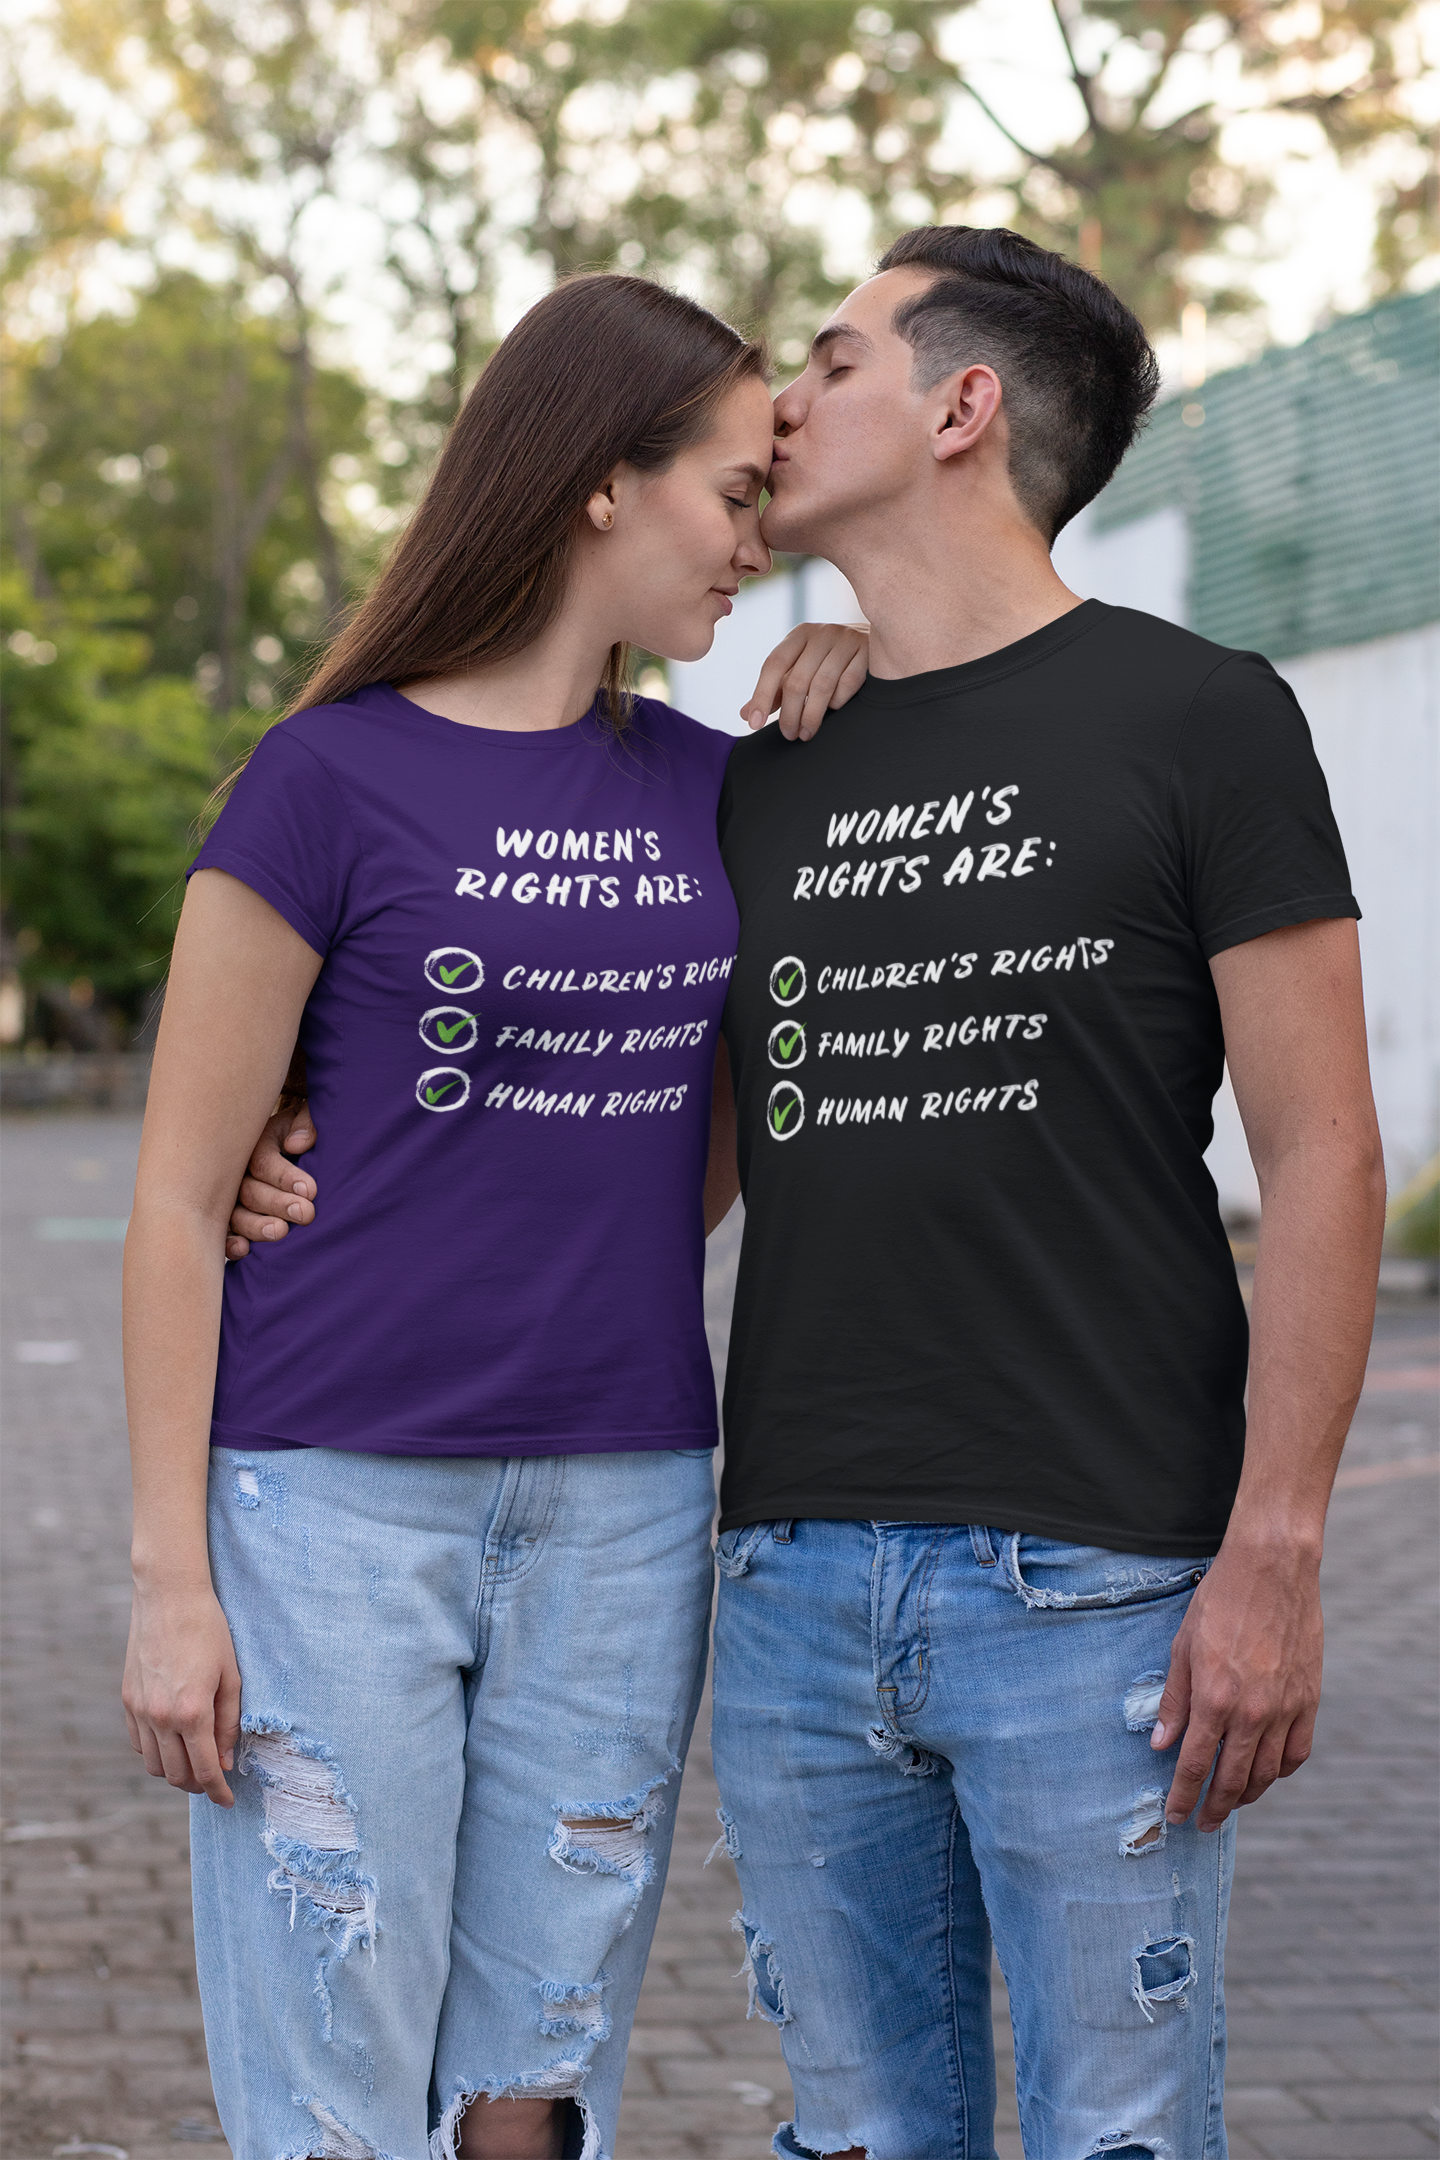 Women's rights are everyone's rights : Unisex 100% Premium Comfy Cotton T-Shirt